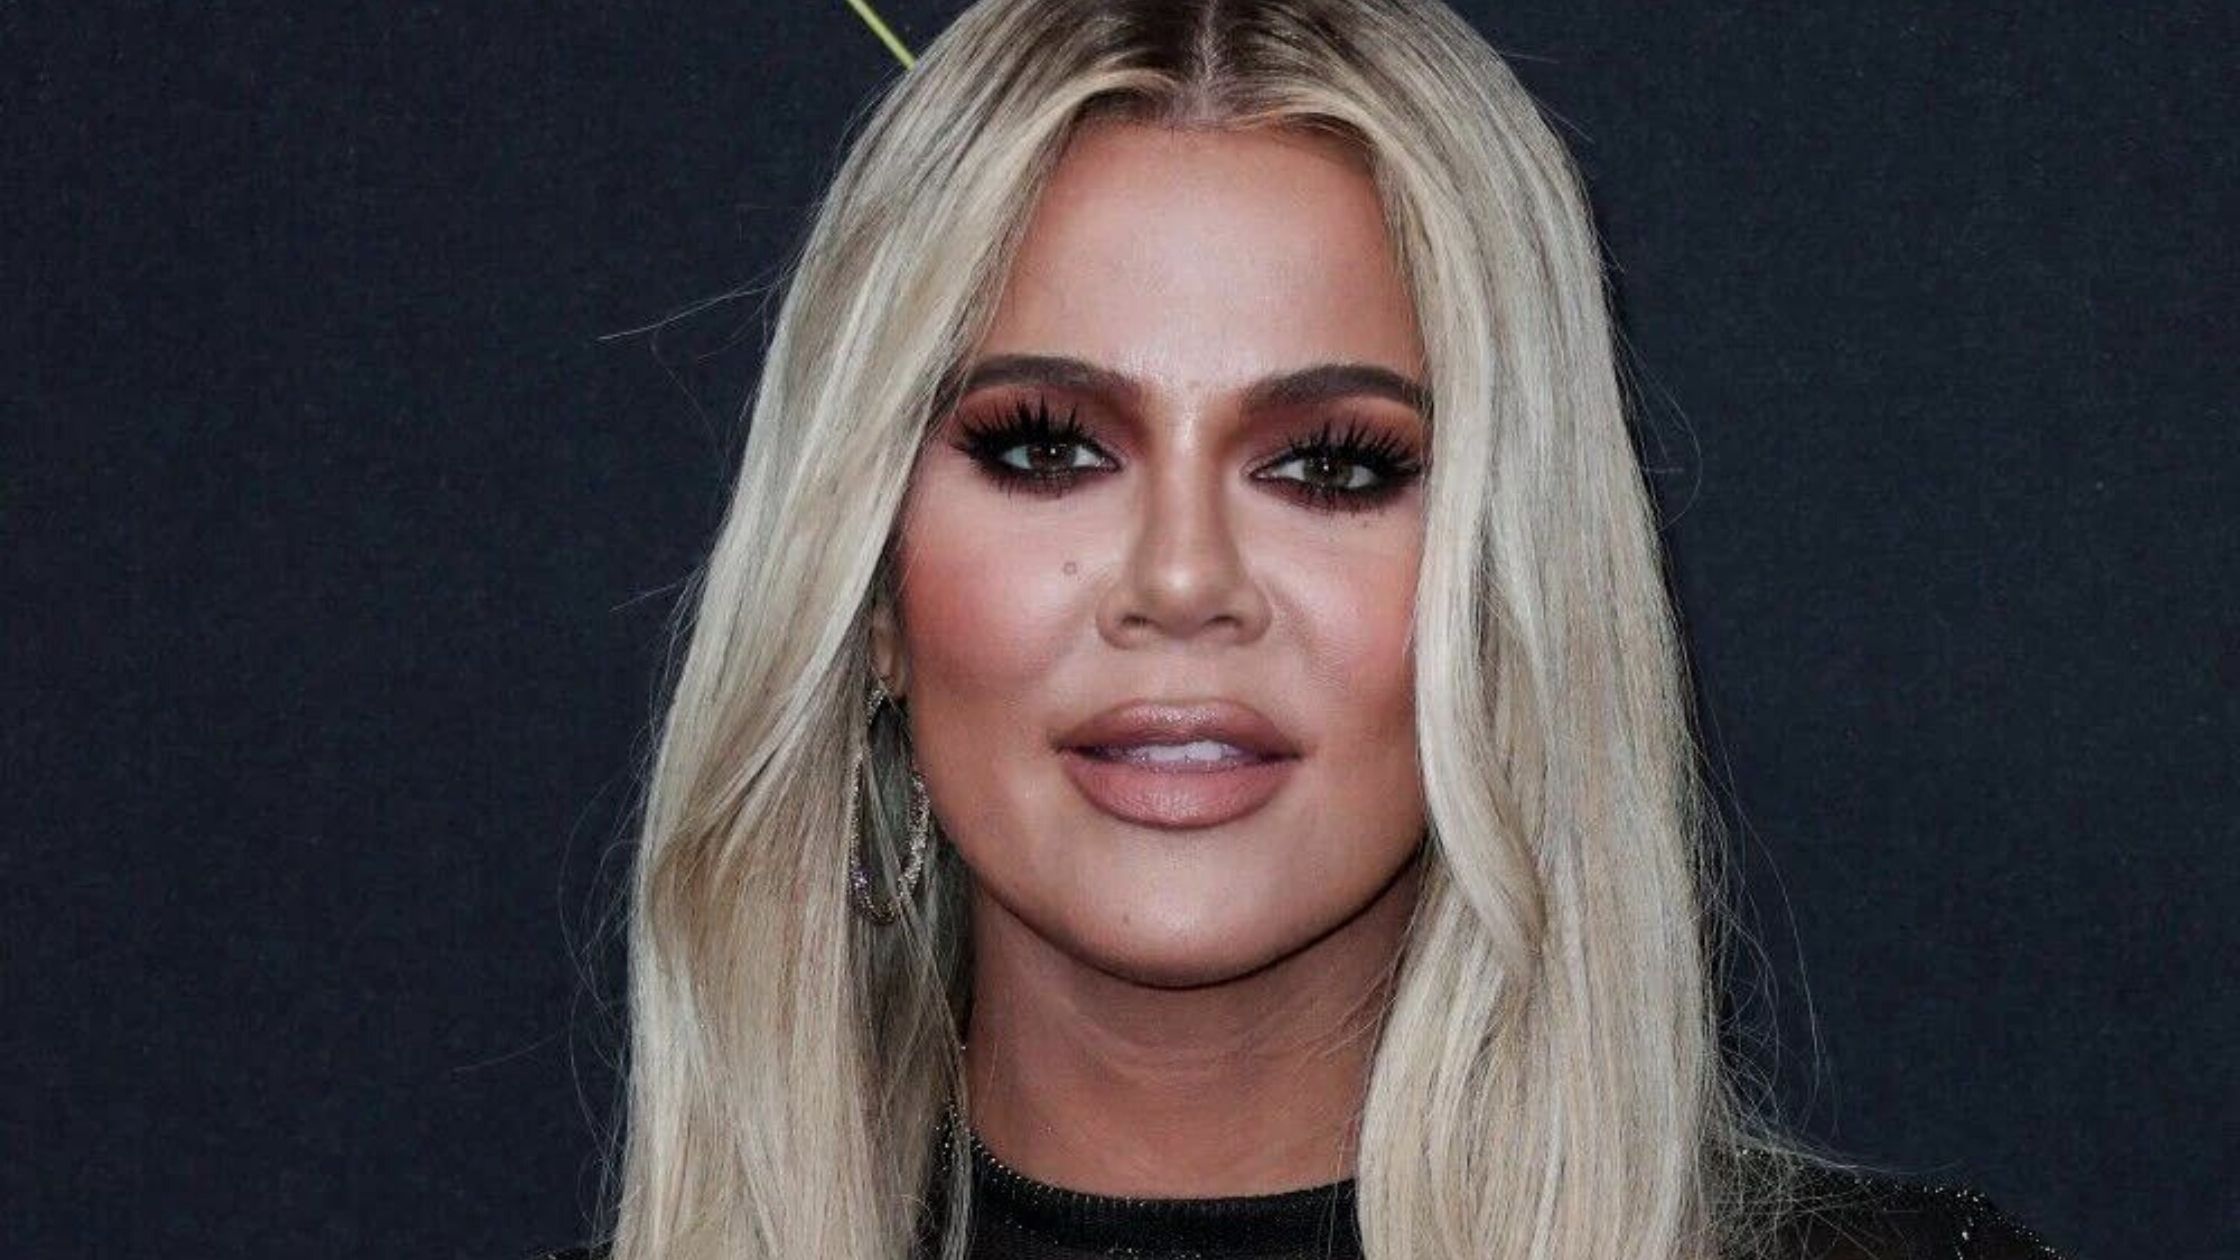 Is Khloe Kardashian Dating Anyone Now? Relationship Status, Net Worth, Age And More!